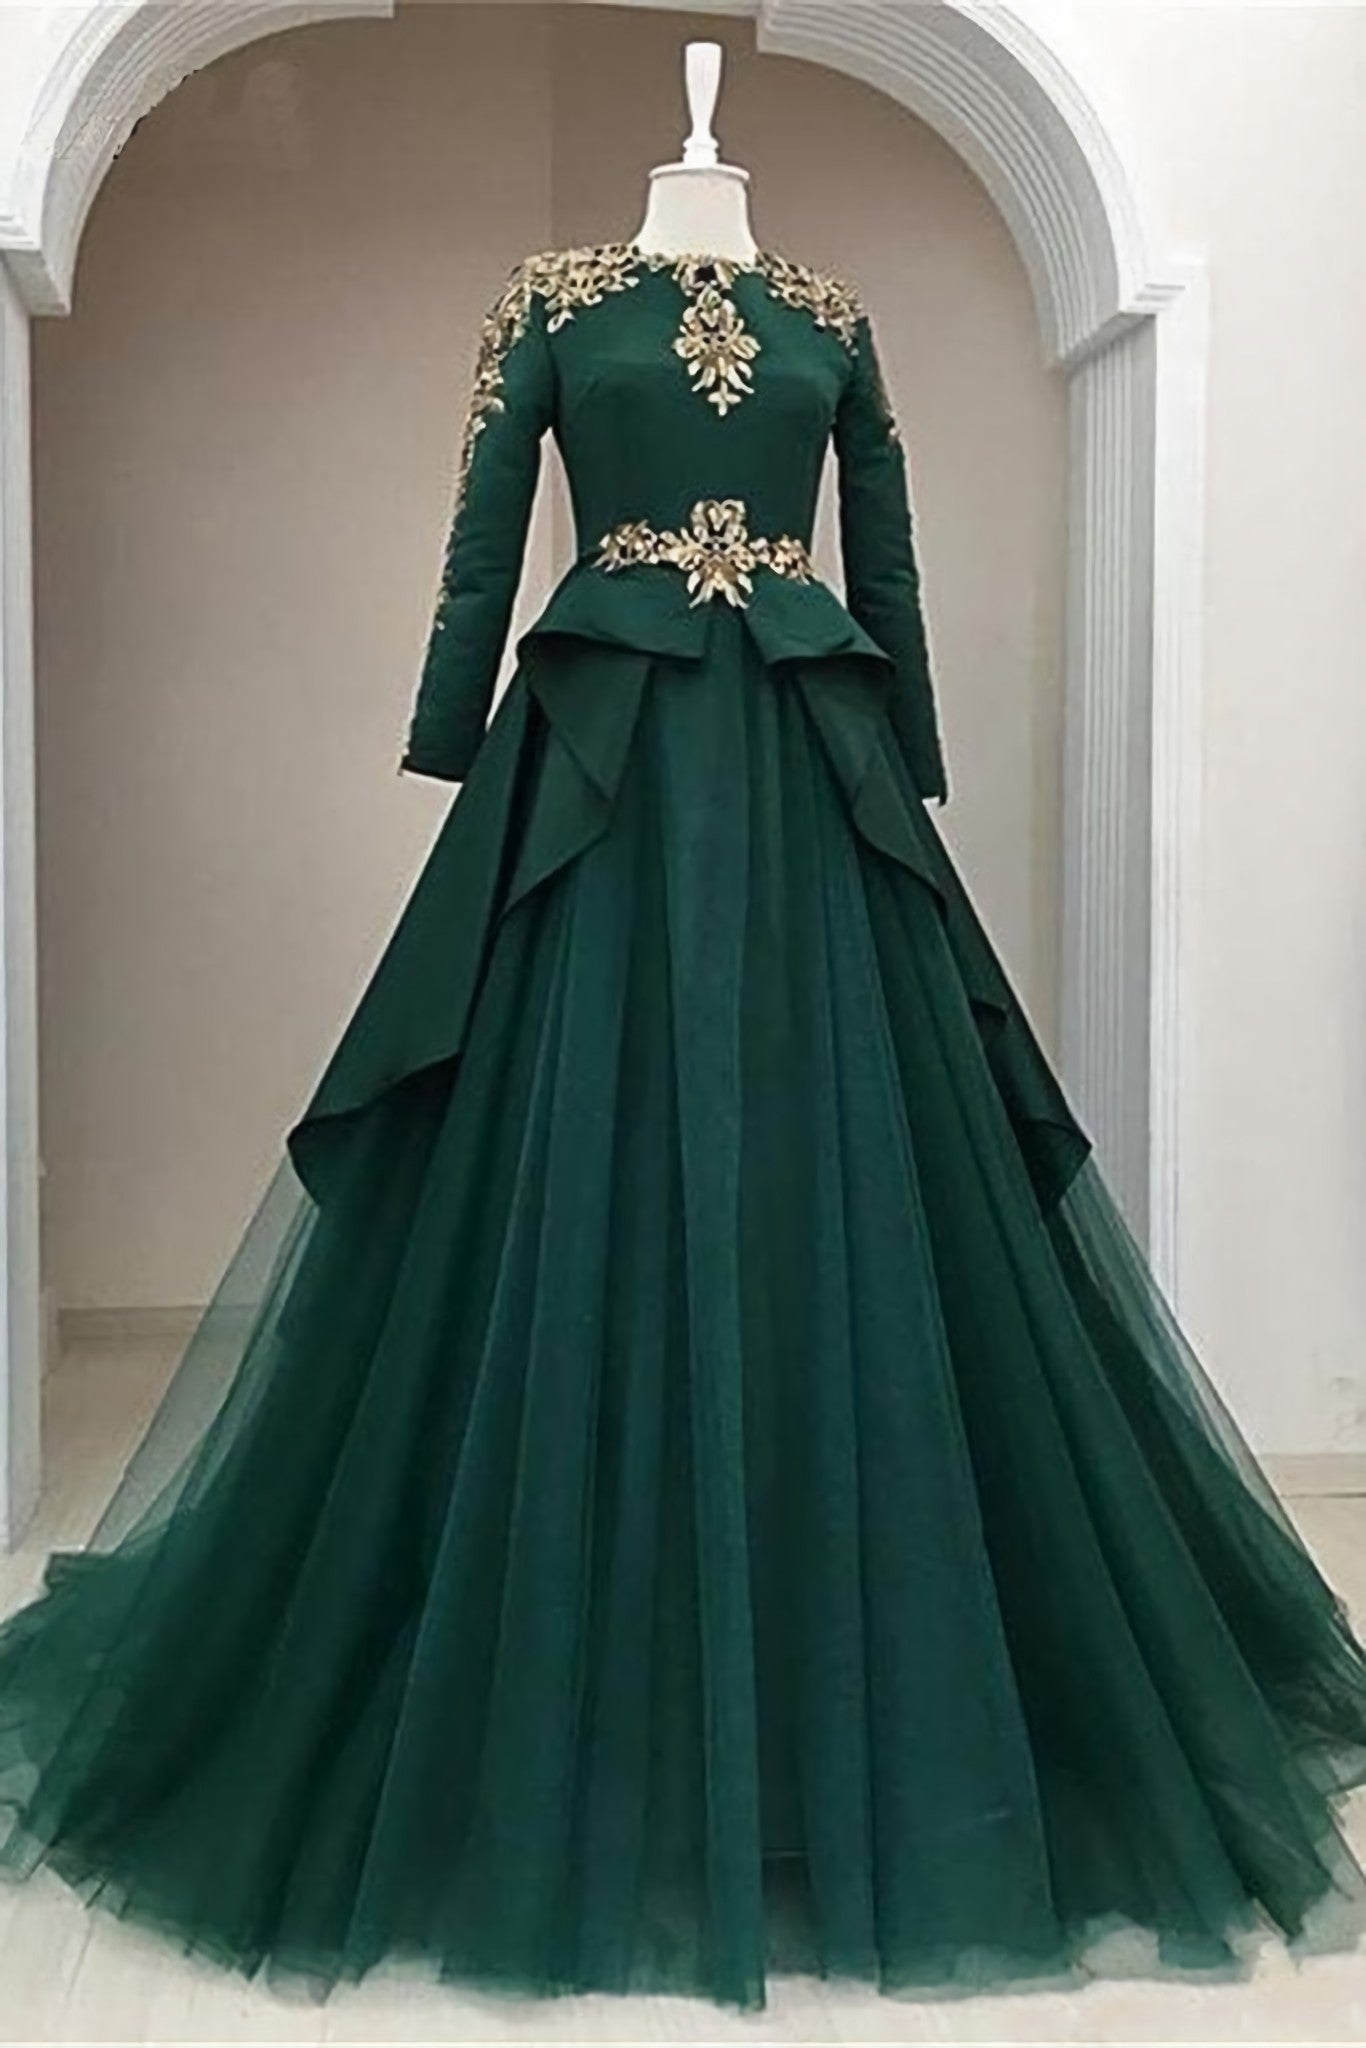 Homecoming Dresses Chiffon, Dark Green Satin Tulle O Neck Long Sleeve Arabic Formal Prom Dress, With Applique